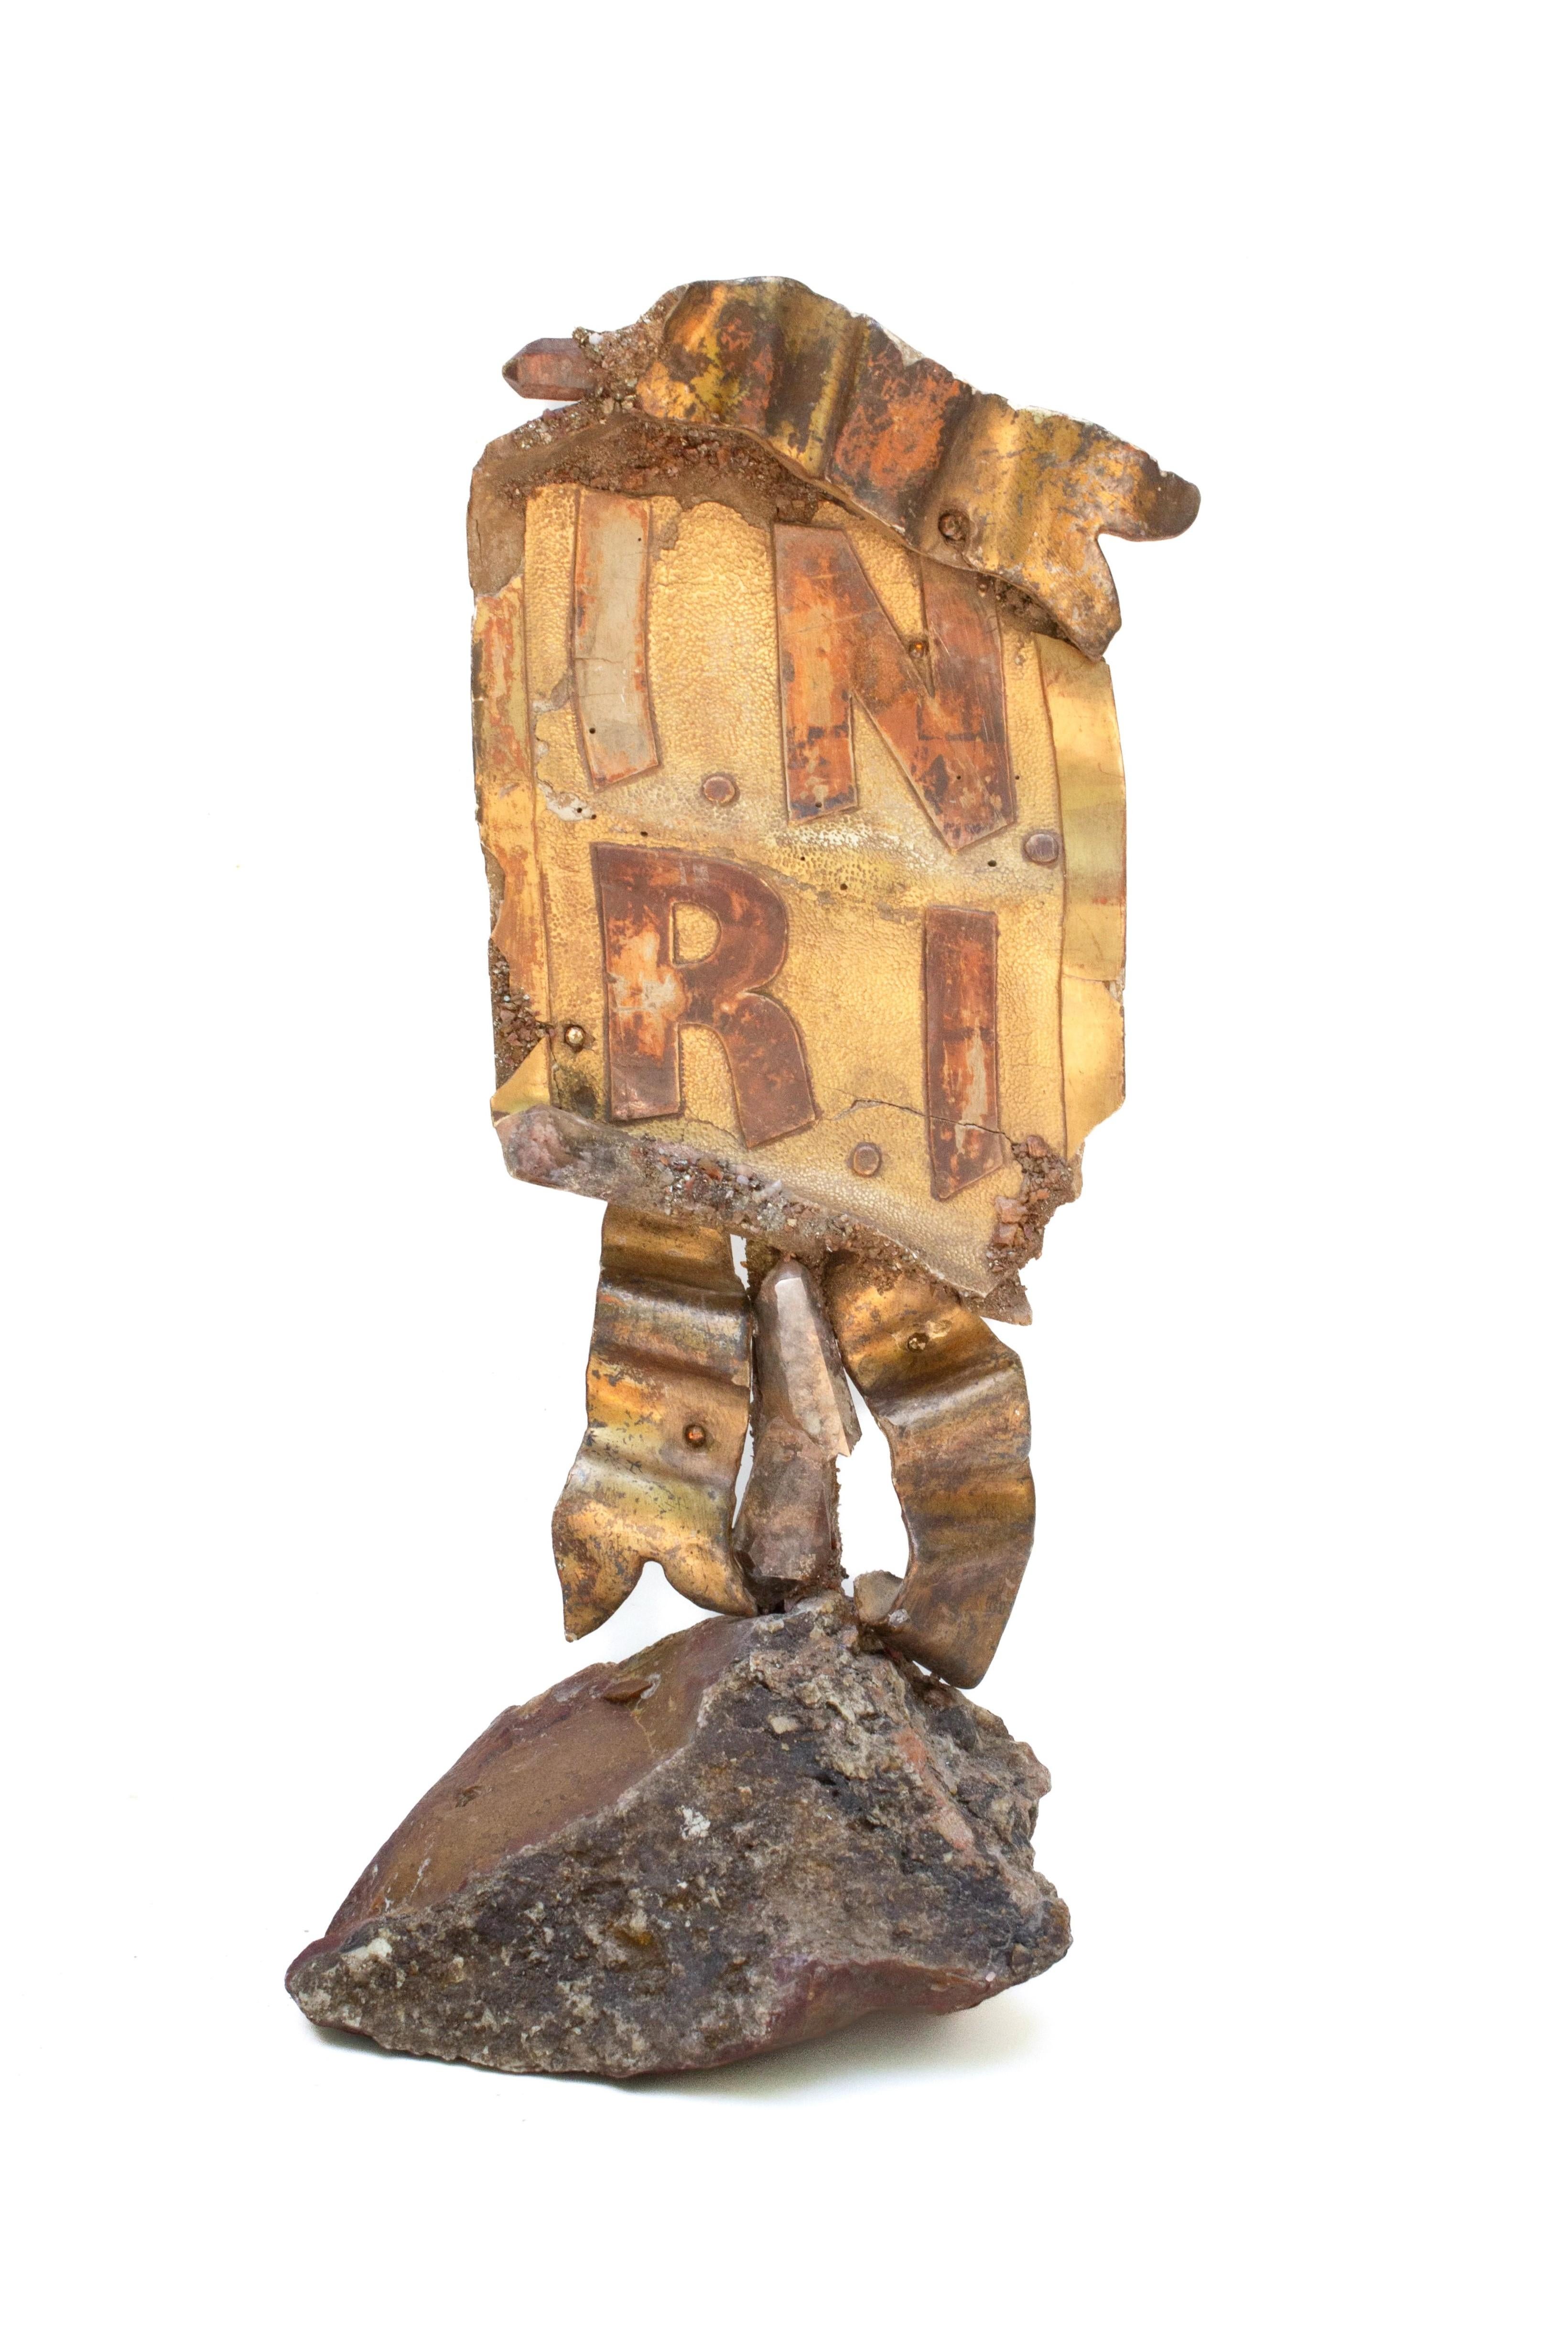 Sculptural 18th century Italian gilded fragment artifact with phantom quartz and mounted on raw agate. 

The piece originally comes from a historical church in Italy. INRI is written on  the piece which stems from the Latin phrase 'Iesus Nazarenus